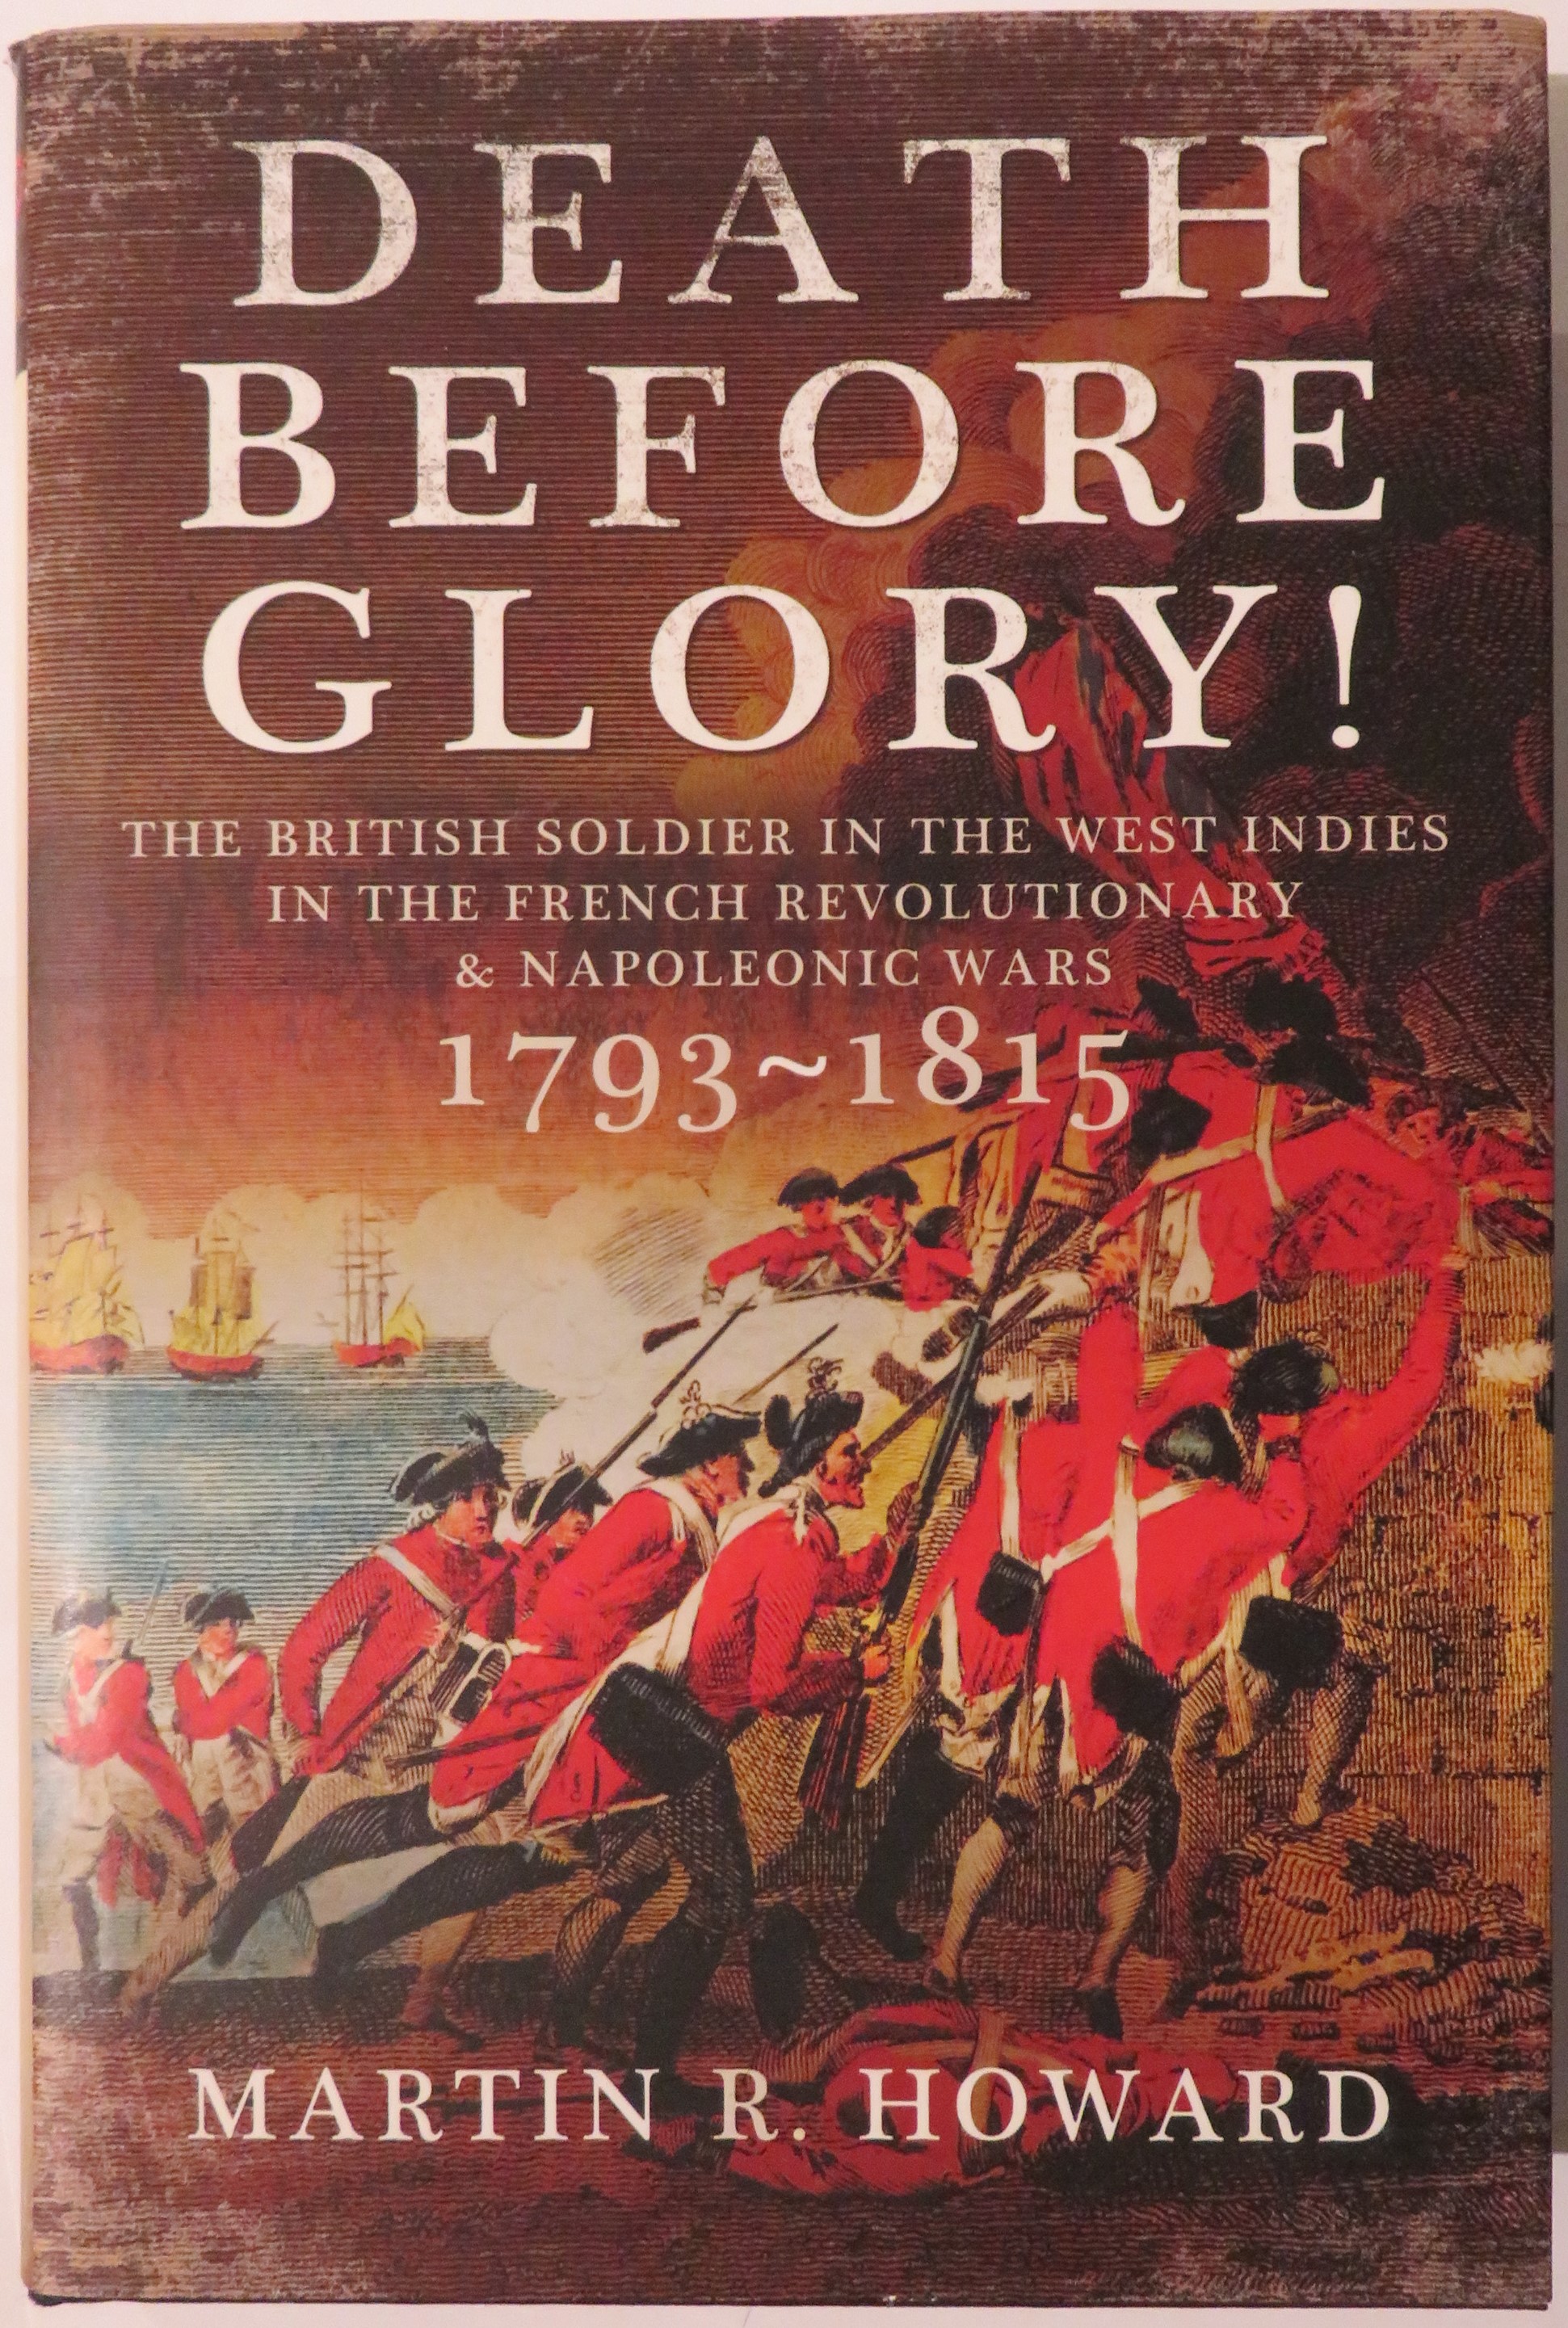 Death Before Glory: The British Soldier in the West Indies in the French Revolutionary & Napoleonic Wars 1793-1815